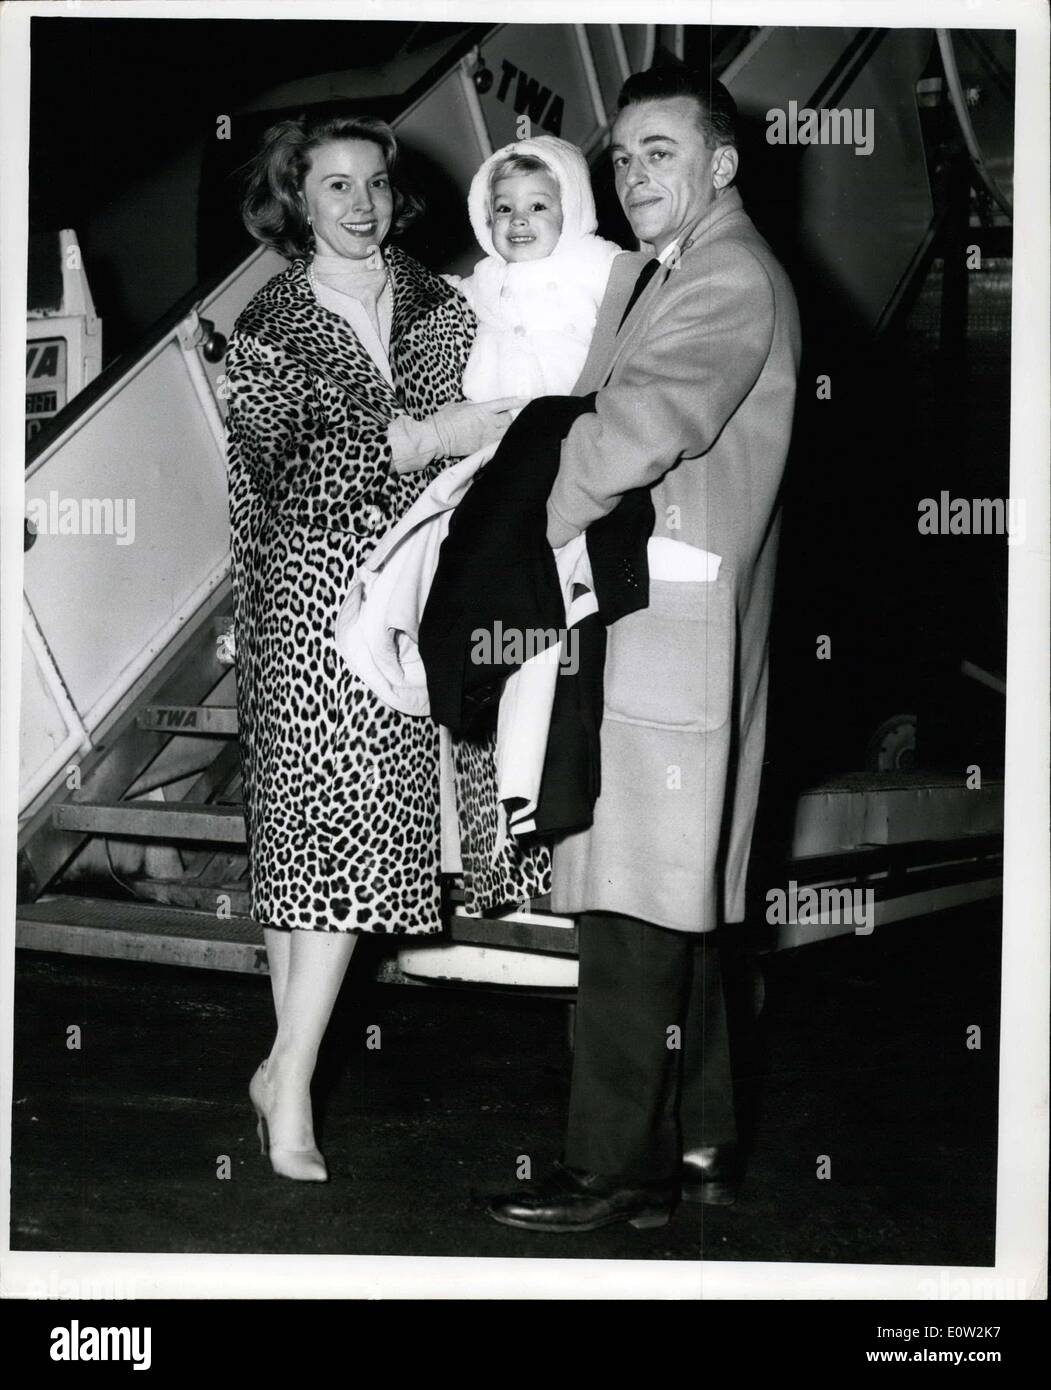 Dec. 23, 1960 - For Immediate Release:N.Y. International Airport, December 23, 1960 Alan Jay Lerner, of the famous Lerner &Loewe Musical team, His wife and two year old son Michael Prepare to Board a TWA Super Jet for Paris following his recent opening of the Skash Hit ''Camelot'' on Broad way. The Lerner's will enjoy a winner vacation on the continent for three weeks. Stock Photo